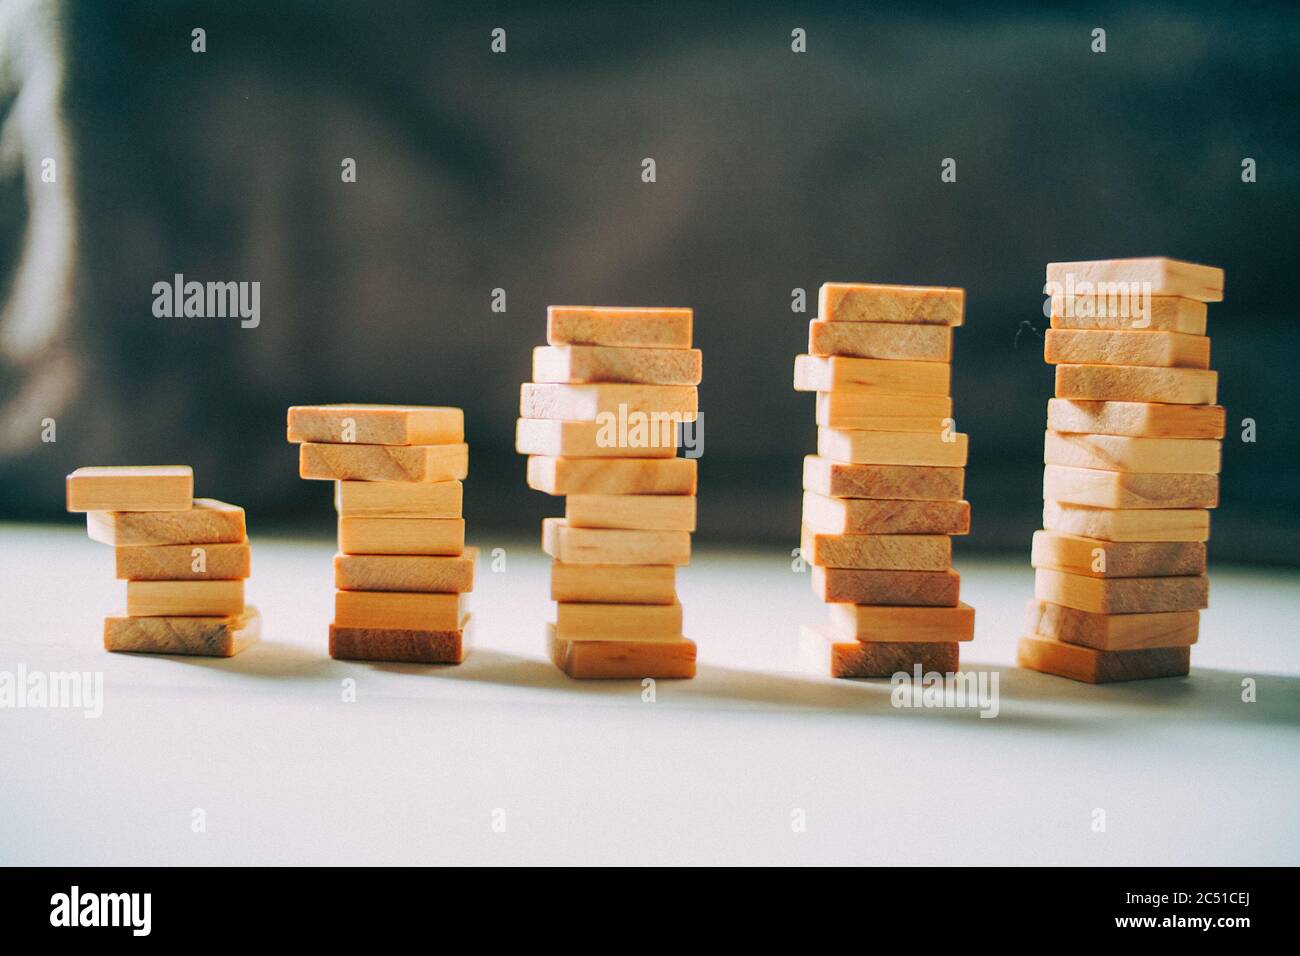 Wooden Cubes stack each other on Wood. Finance Business Design Template ...